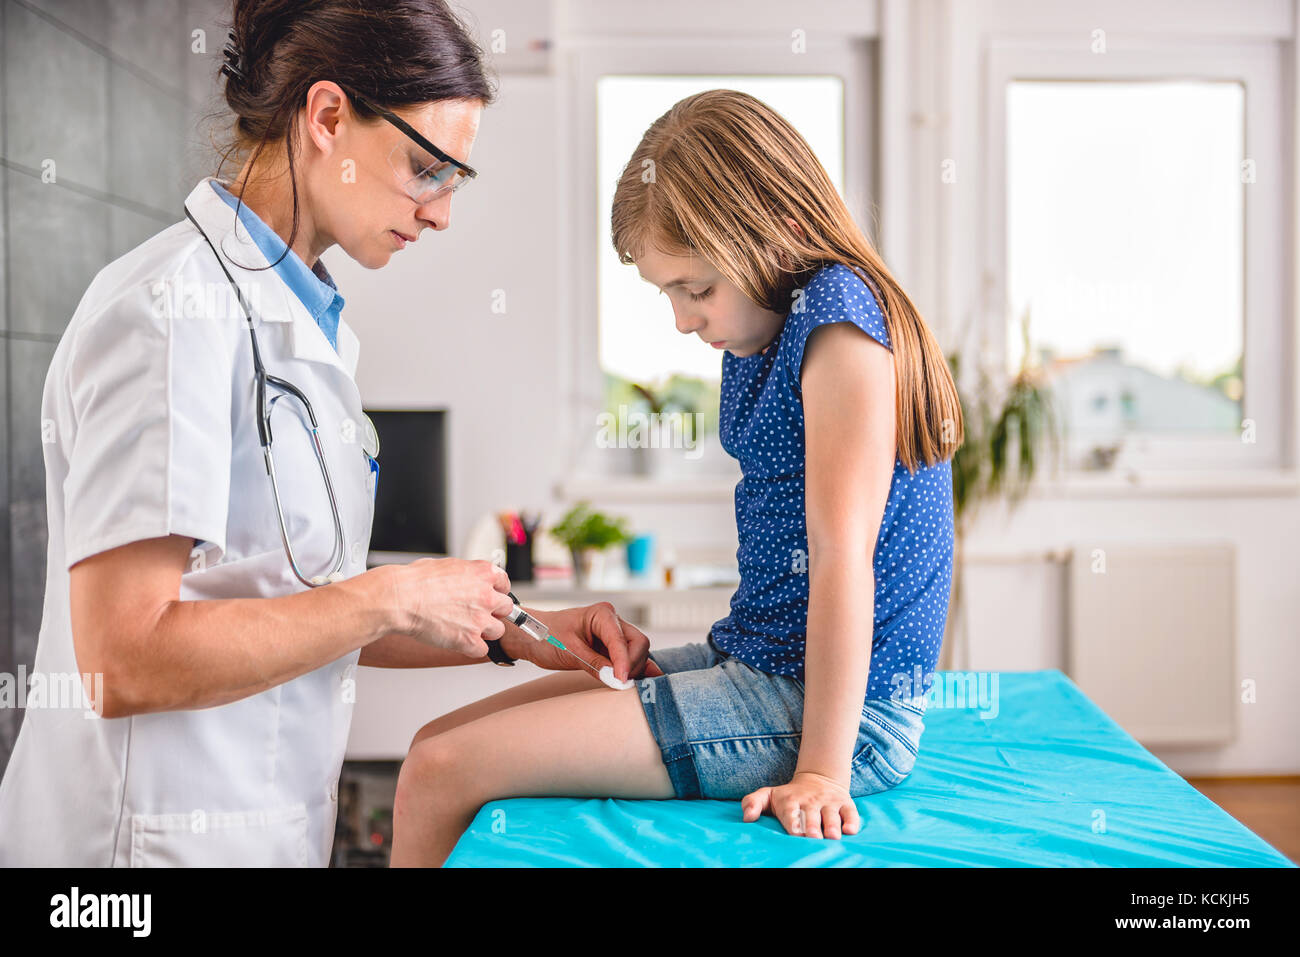 Pediatrics female doctor giving a young girl a vaccine shot in the leg Stock Photo